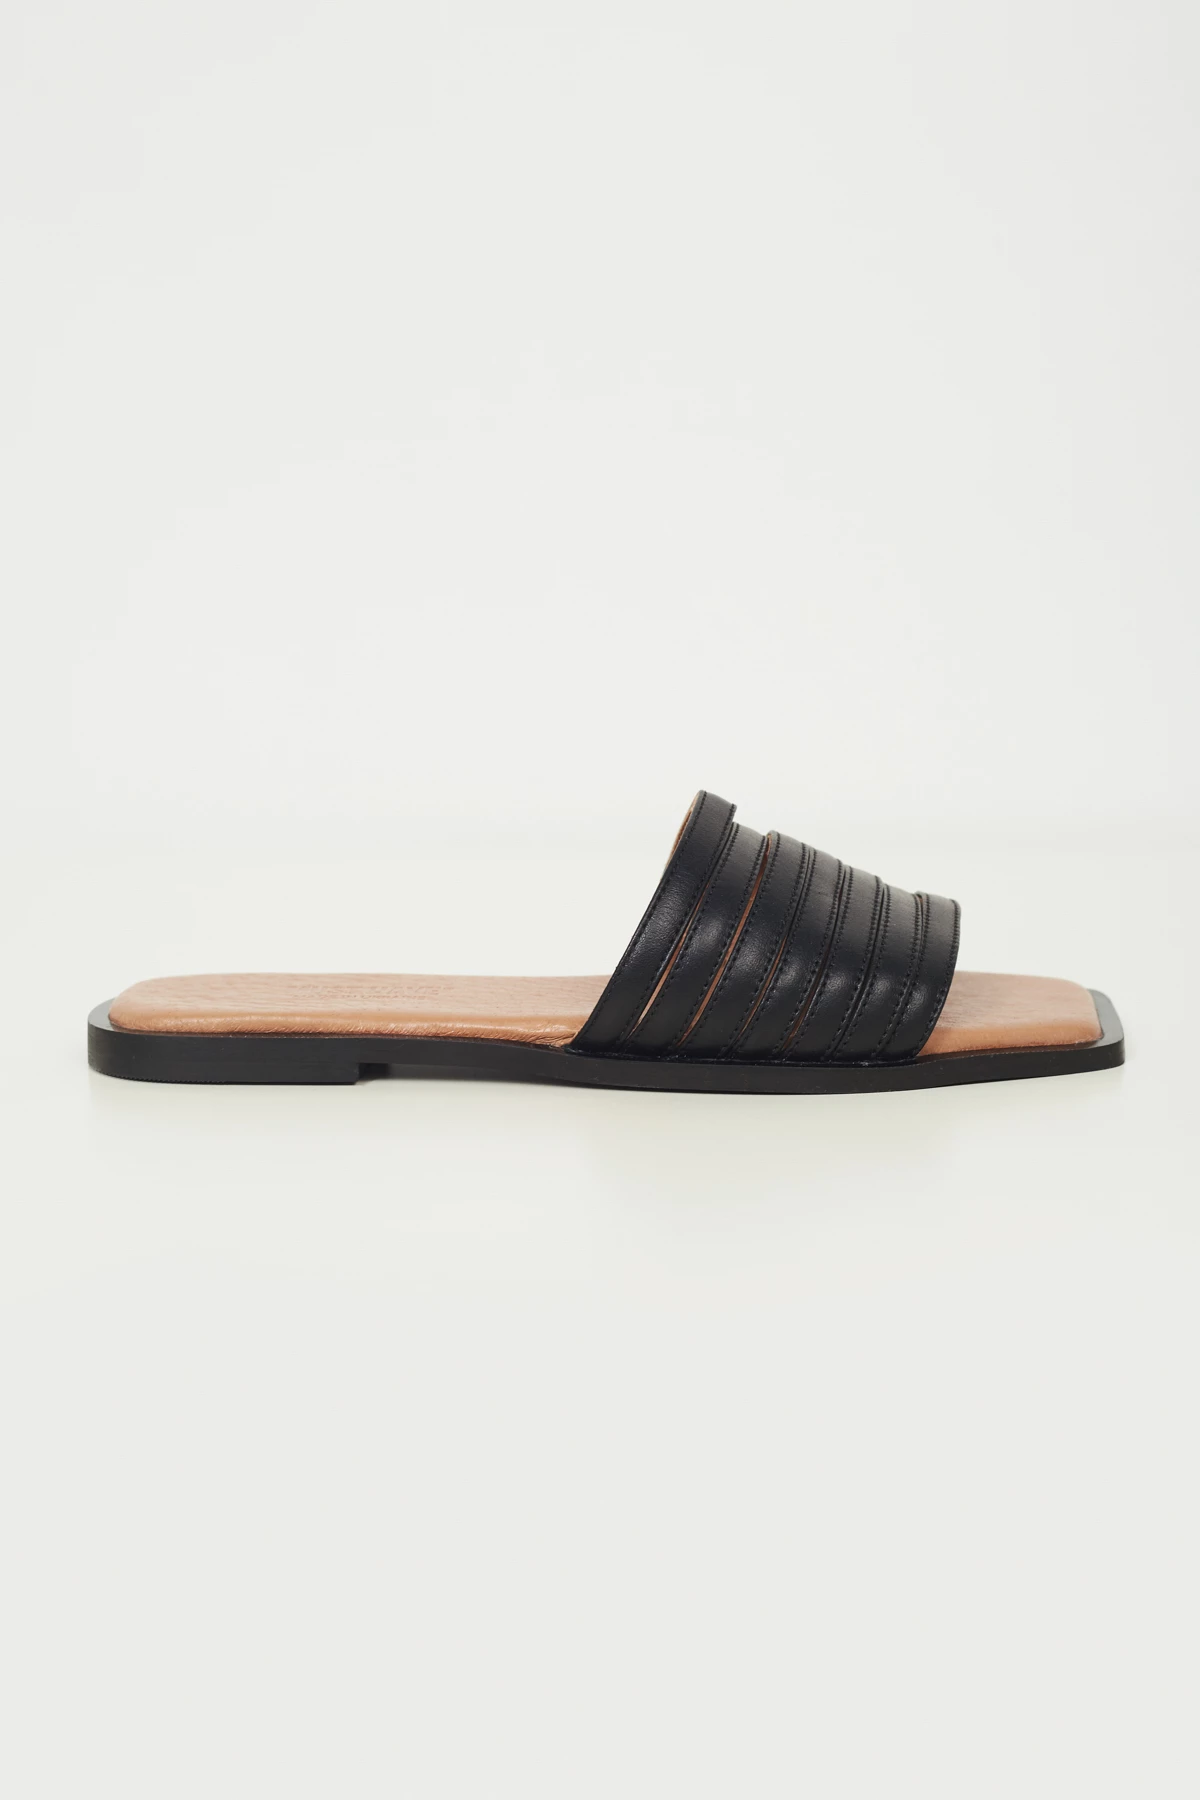 Low-cut leather mules in black, photo 4